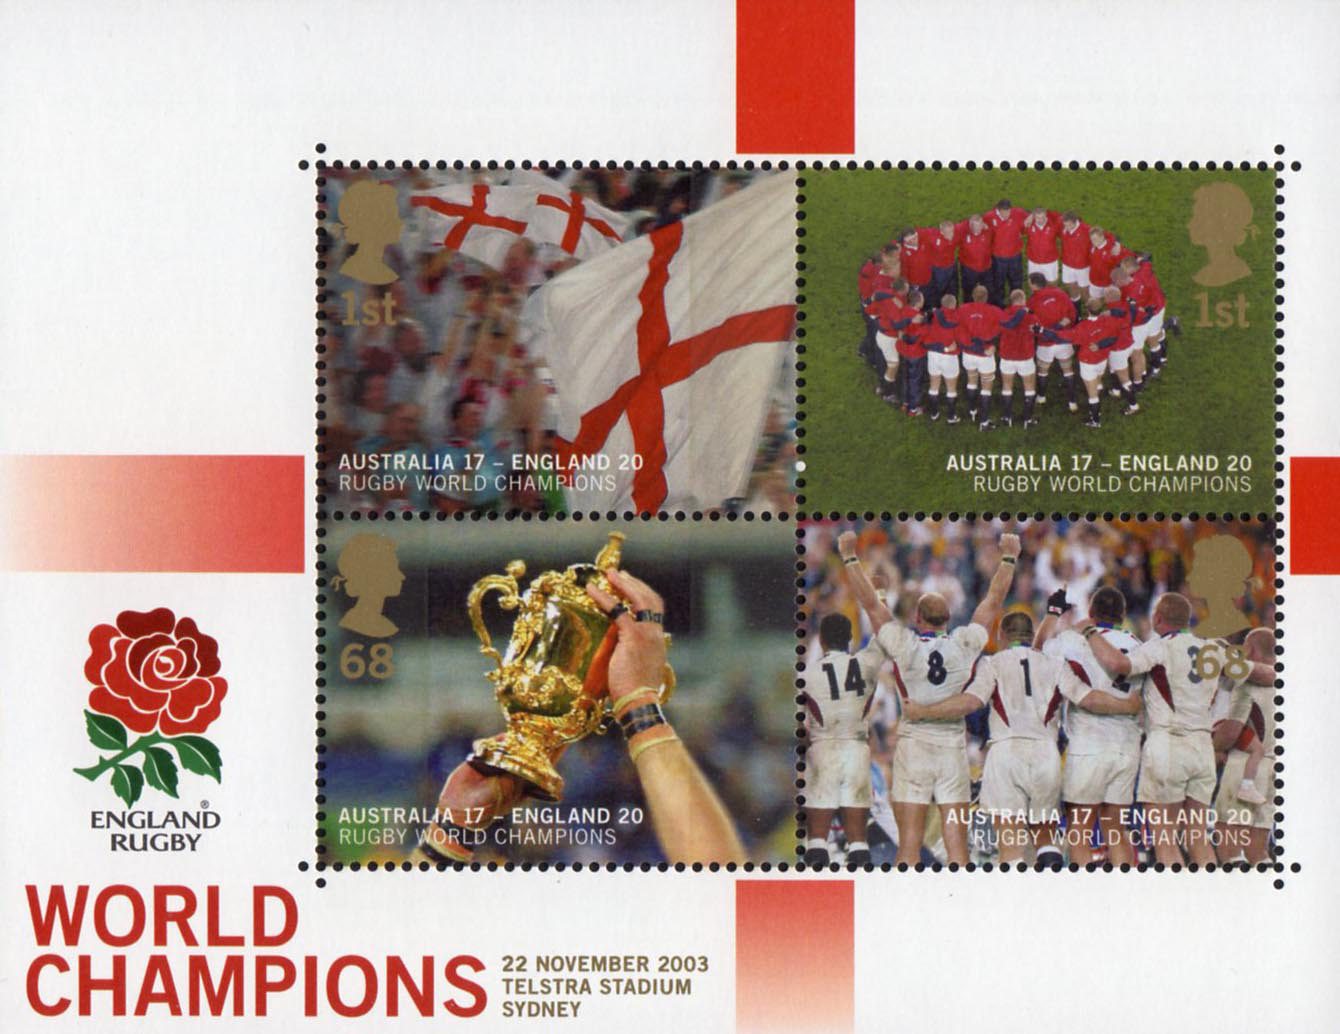 Miniature Sheet comprising of images of England winning the Rugby World Cup in 2003